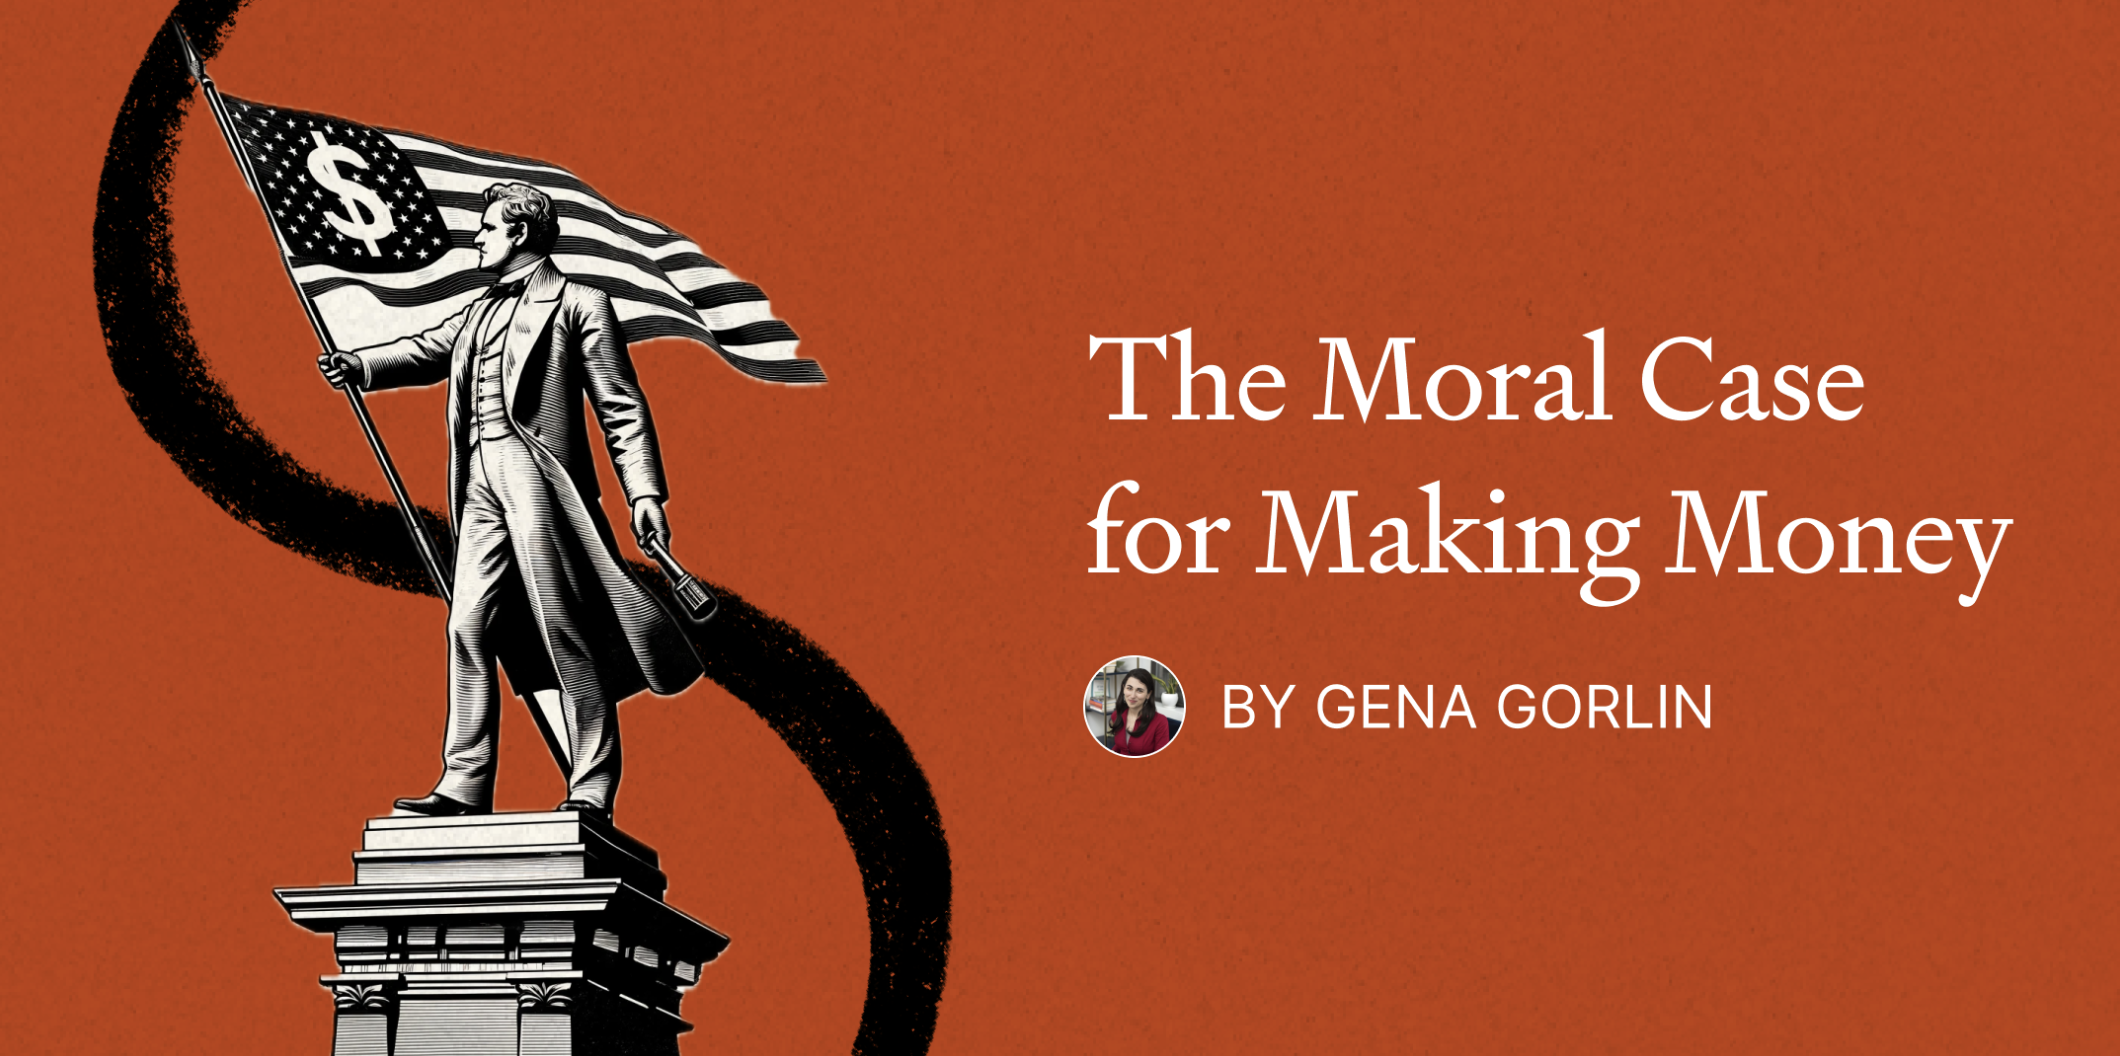 The Moral Case for Making Money (14 minute read)